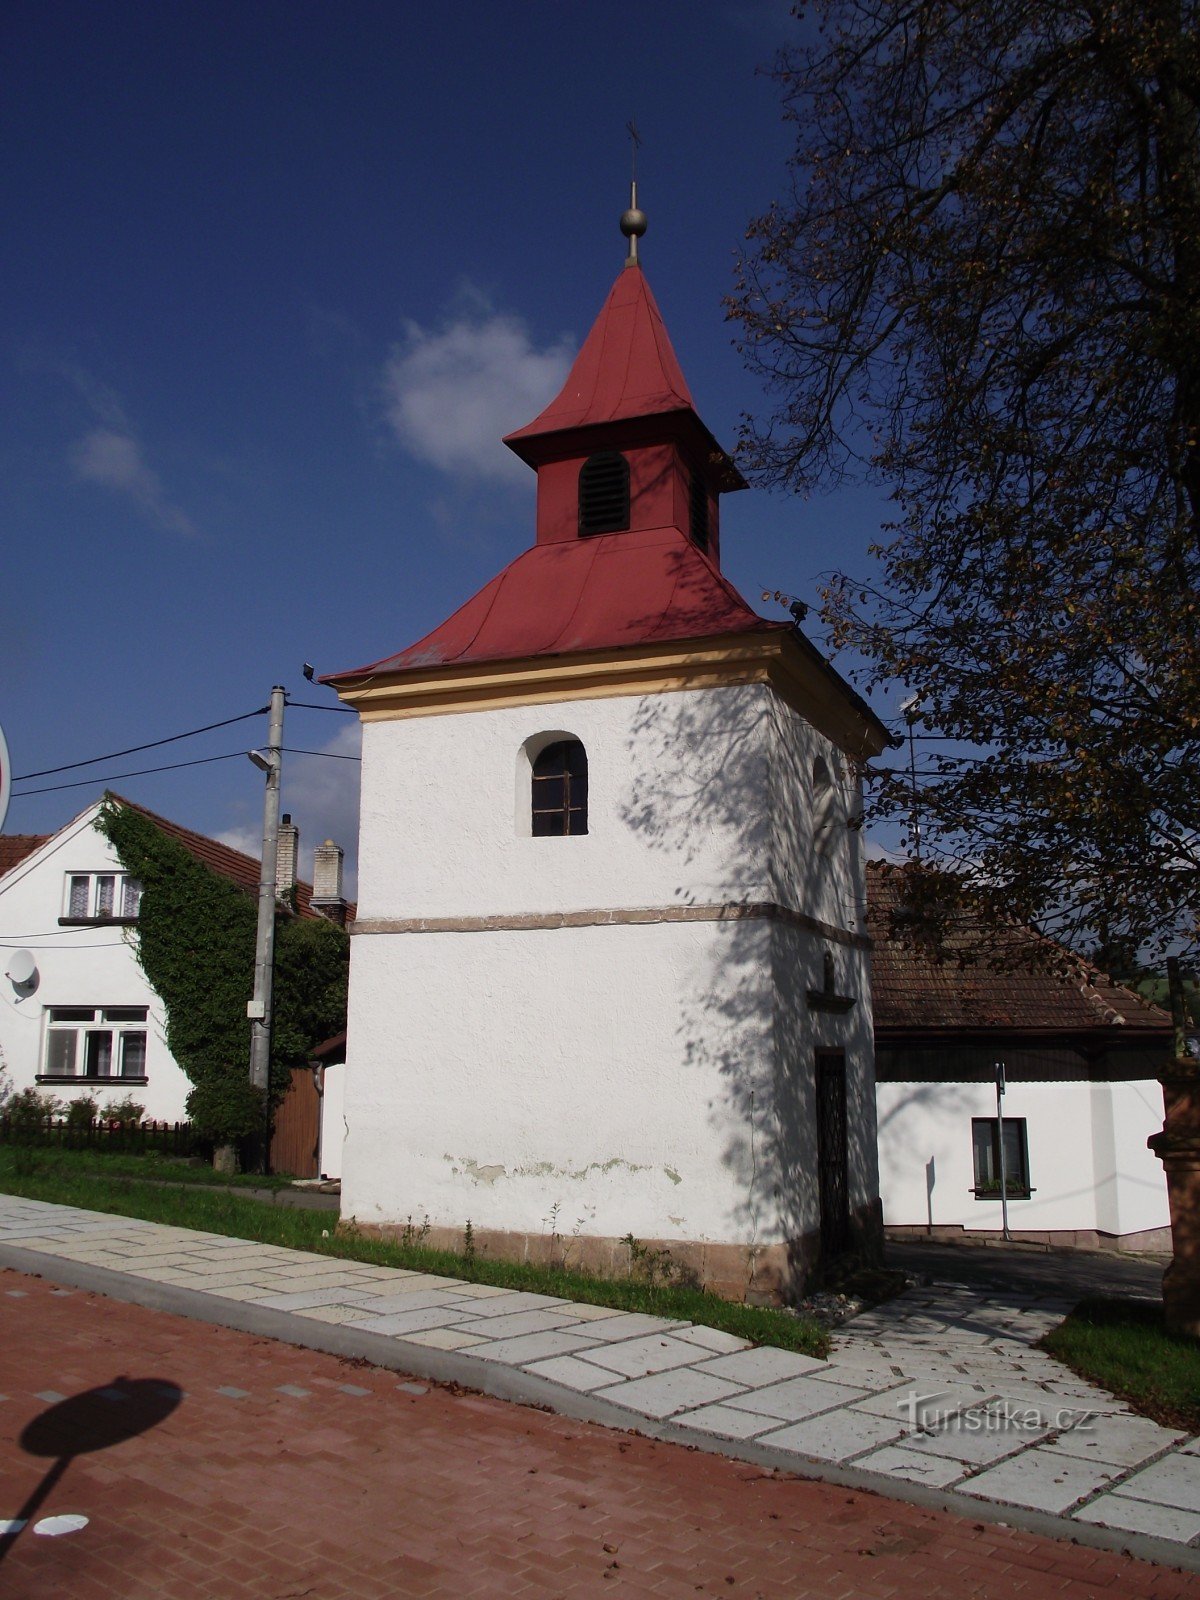 Hluboké Dvory - chapel in the village